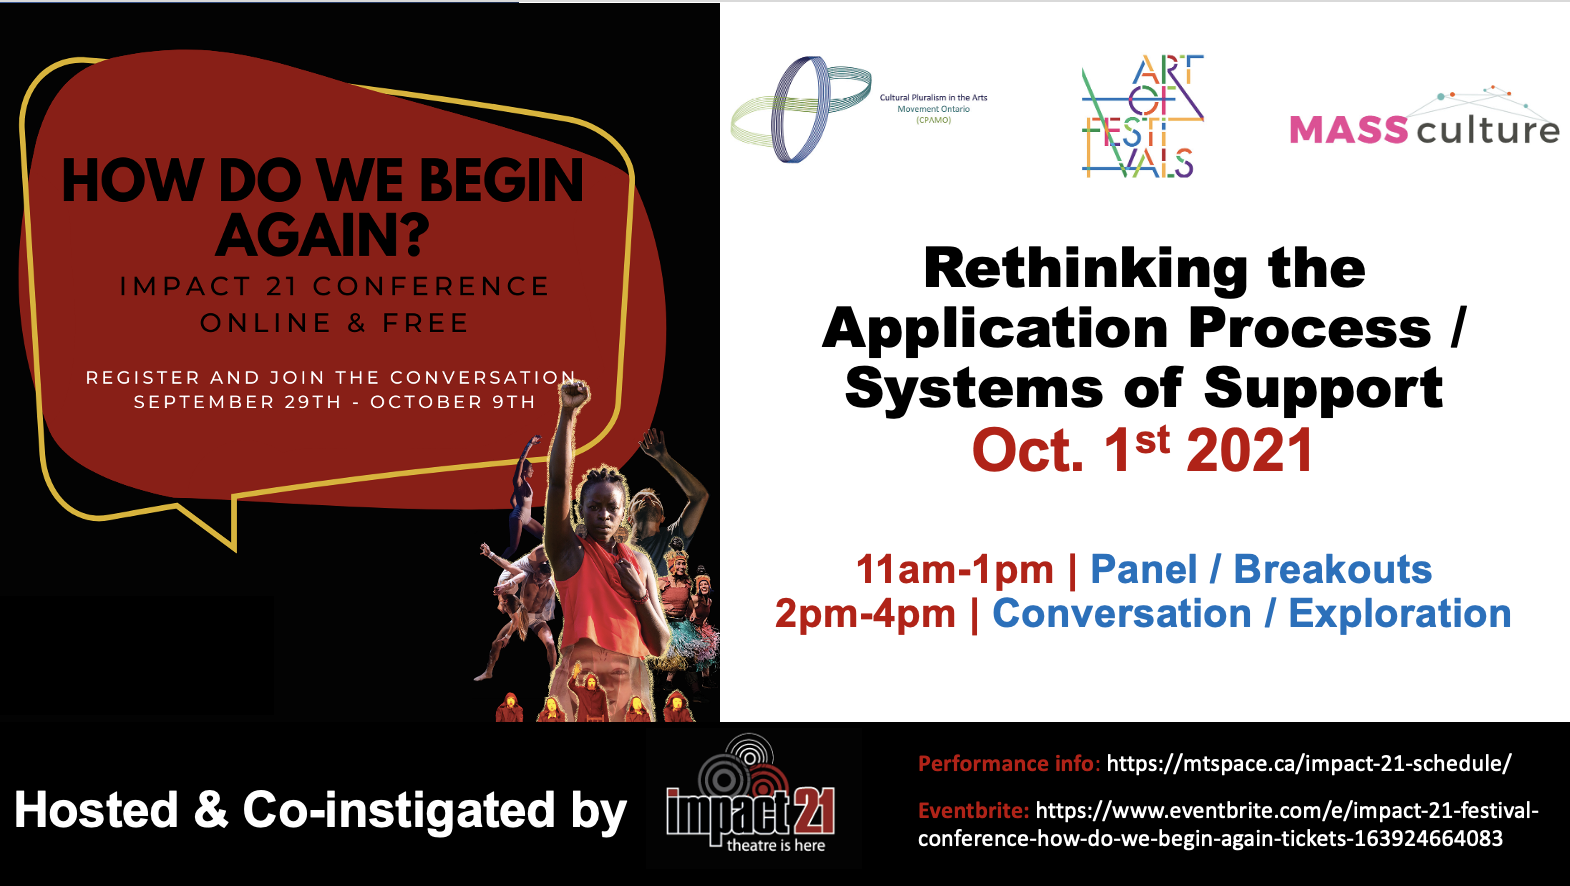 On the left: How do we begin again? Impact 21 conference. Online and free. Register and join the conversation September 29th – October 9th. Beneath the text there is an image with several dancers.  On the right logos of CPAMO, Art of Festivals and Mass Culture. Beneath it: Rethinking the application process/systems of support. Oct. 1st 2021. 11am-1pm, panel/ breakouts. 2pm-4pm conversation/exploration. At the bottom: Hosted and co-instigated by impact21. Performance info https://mtspace.ca/impact-21-schedule/ Eventbrite: https://www.eventbrite.com/e/impact-21-festival-conference-how-do-we-begin-again-tickets-163924664083